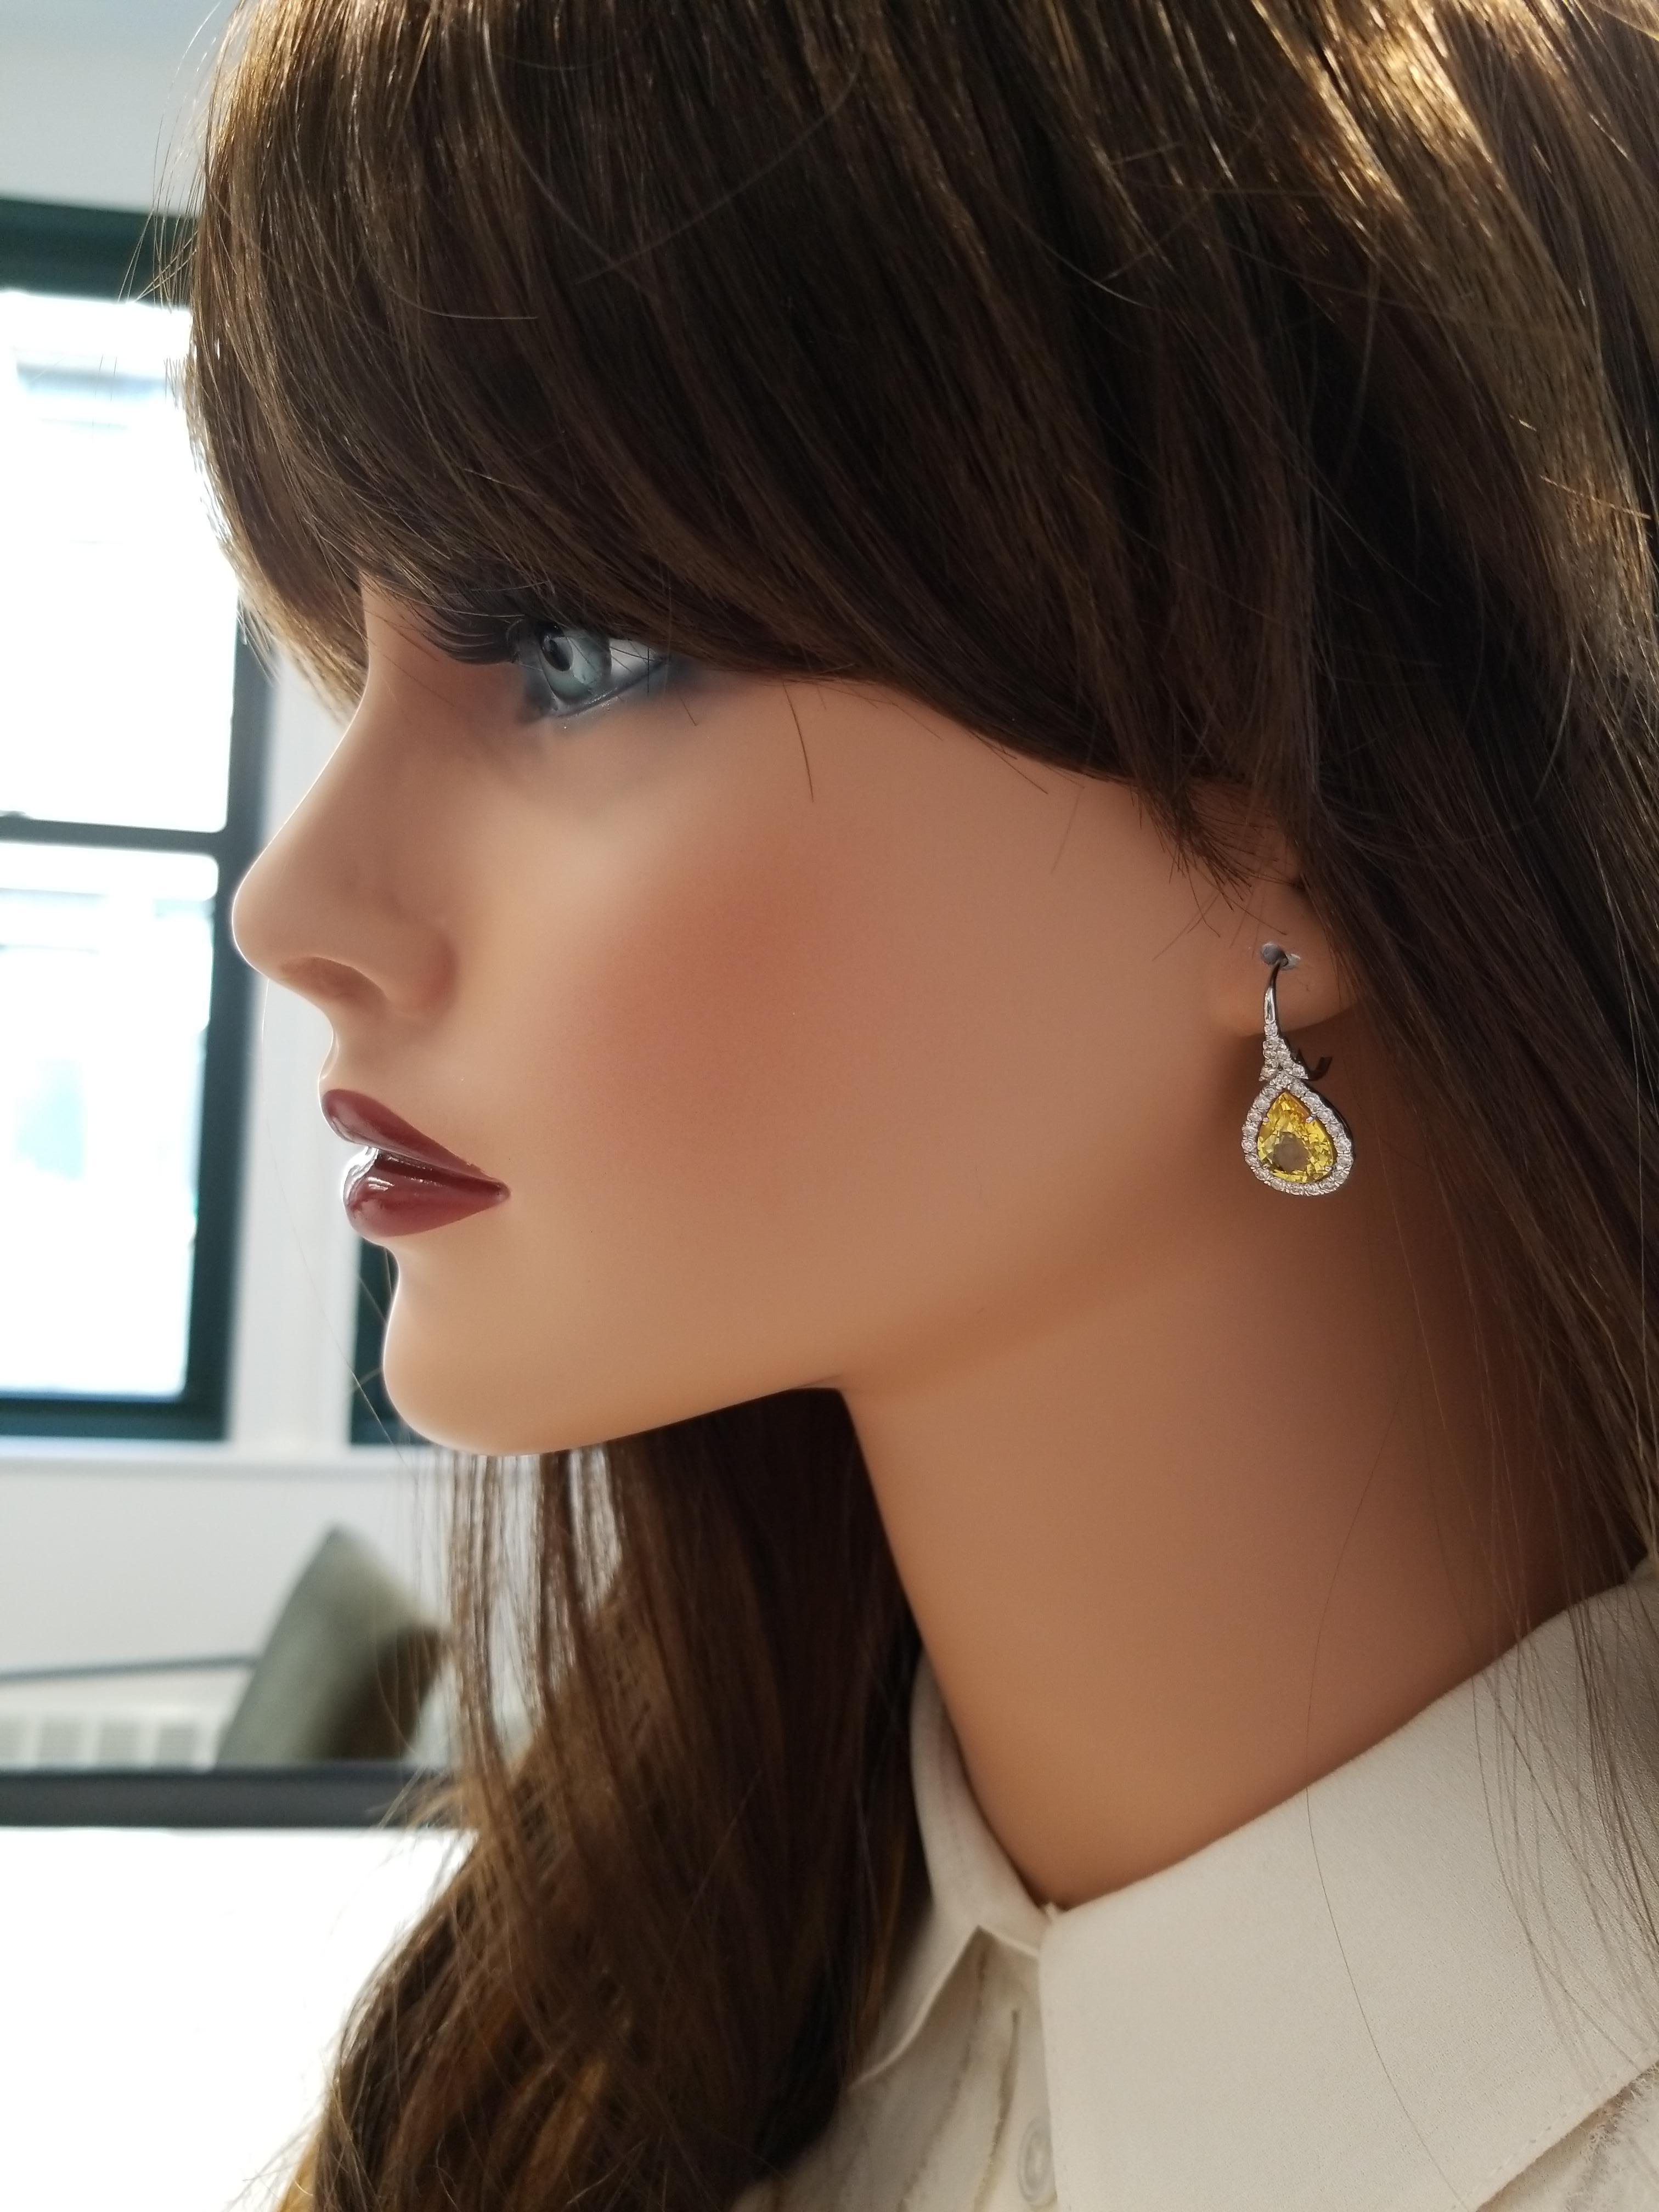 The earrings feature 5.63 carat total weight of illuminating lemon-yellow sapphires. The perfectly matched pear shaped gems are from Sri Lanka. These yellow sapphires are extremely high in purity and transparency. The color is evenly distributed, a